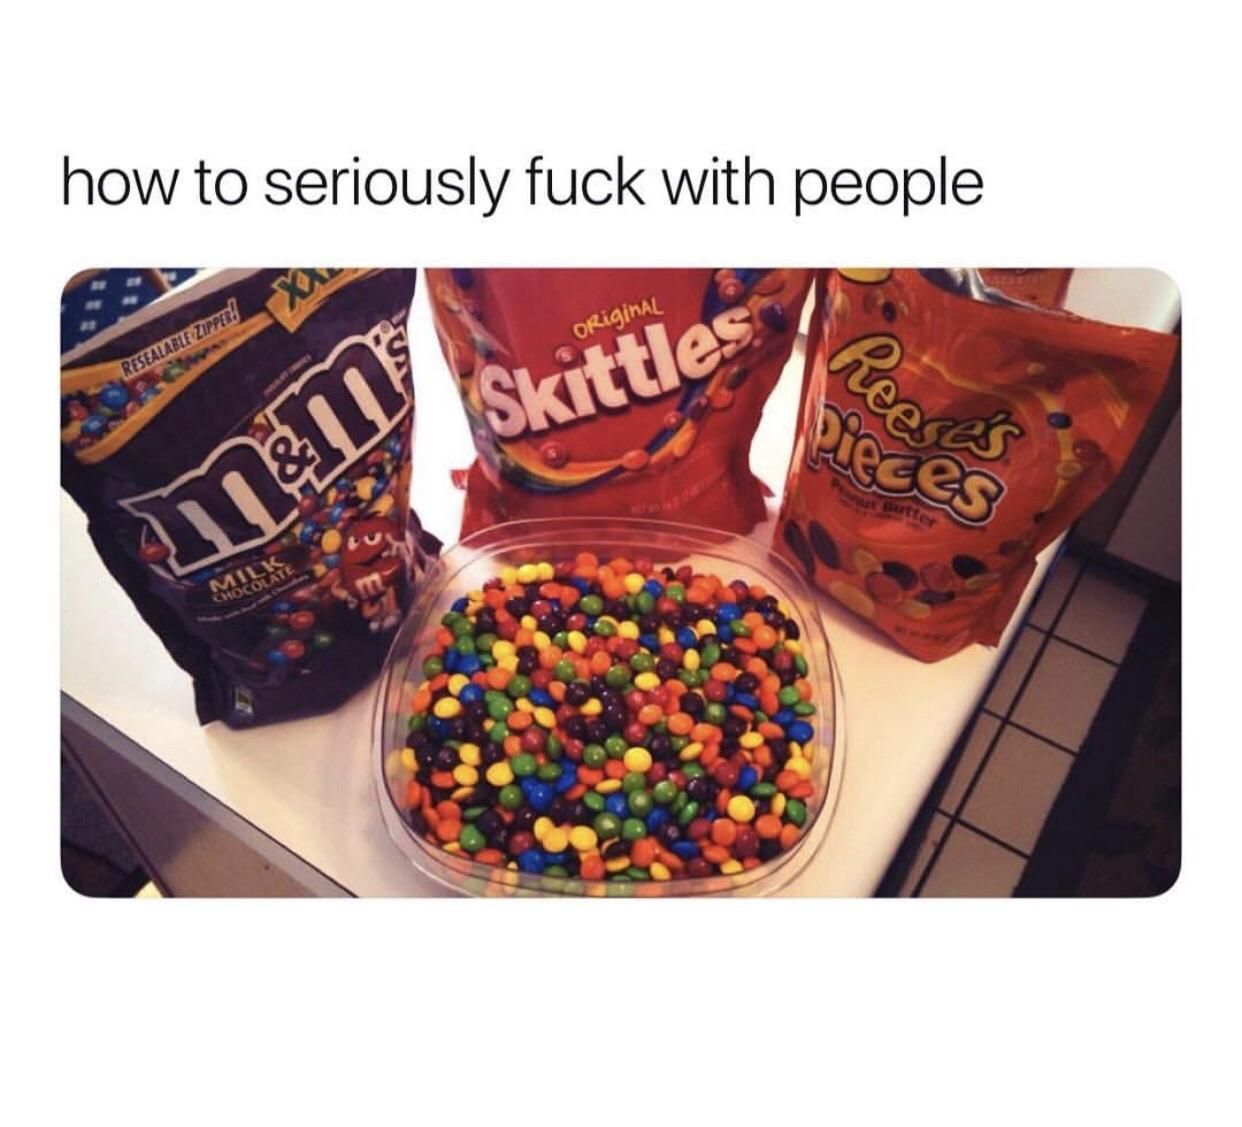 How to seriously *** with people